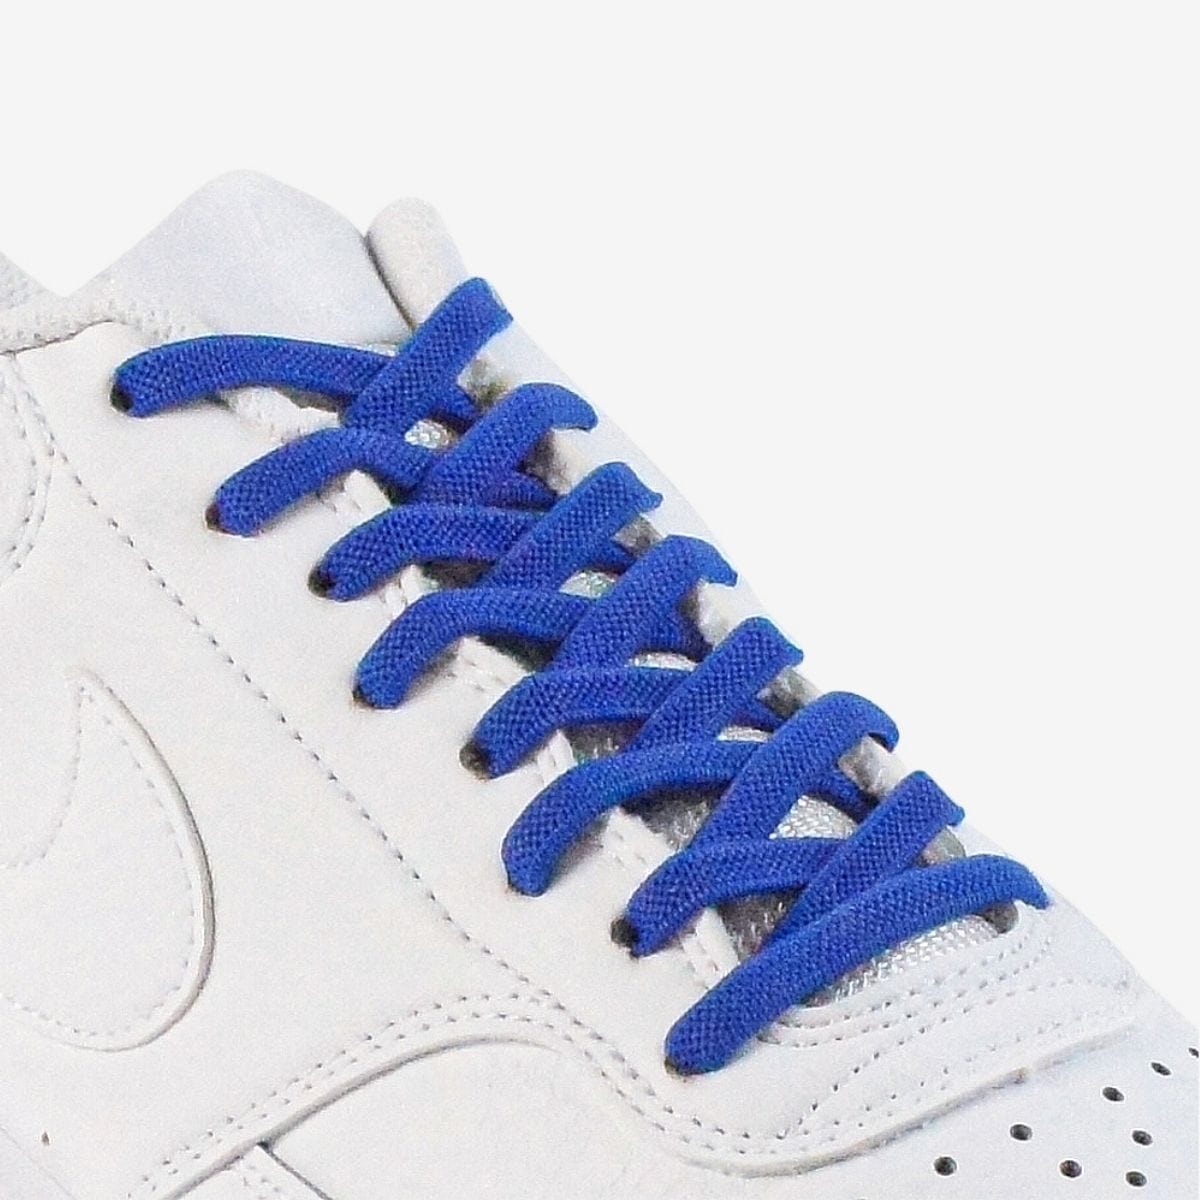 kids-no-tie-shoelaces-with-royal-blue-laces-on-nike-white-sneakers-by-kicks-shoelaces